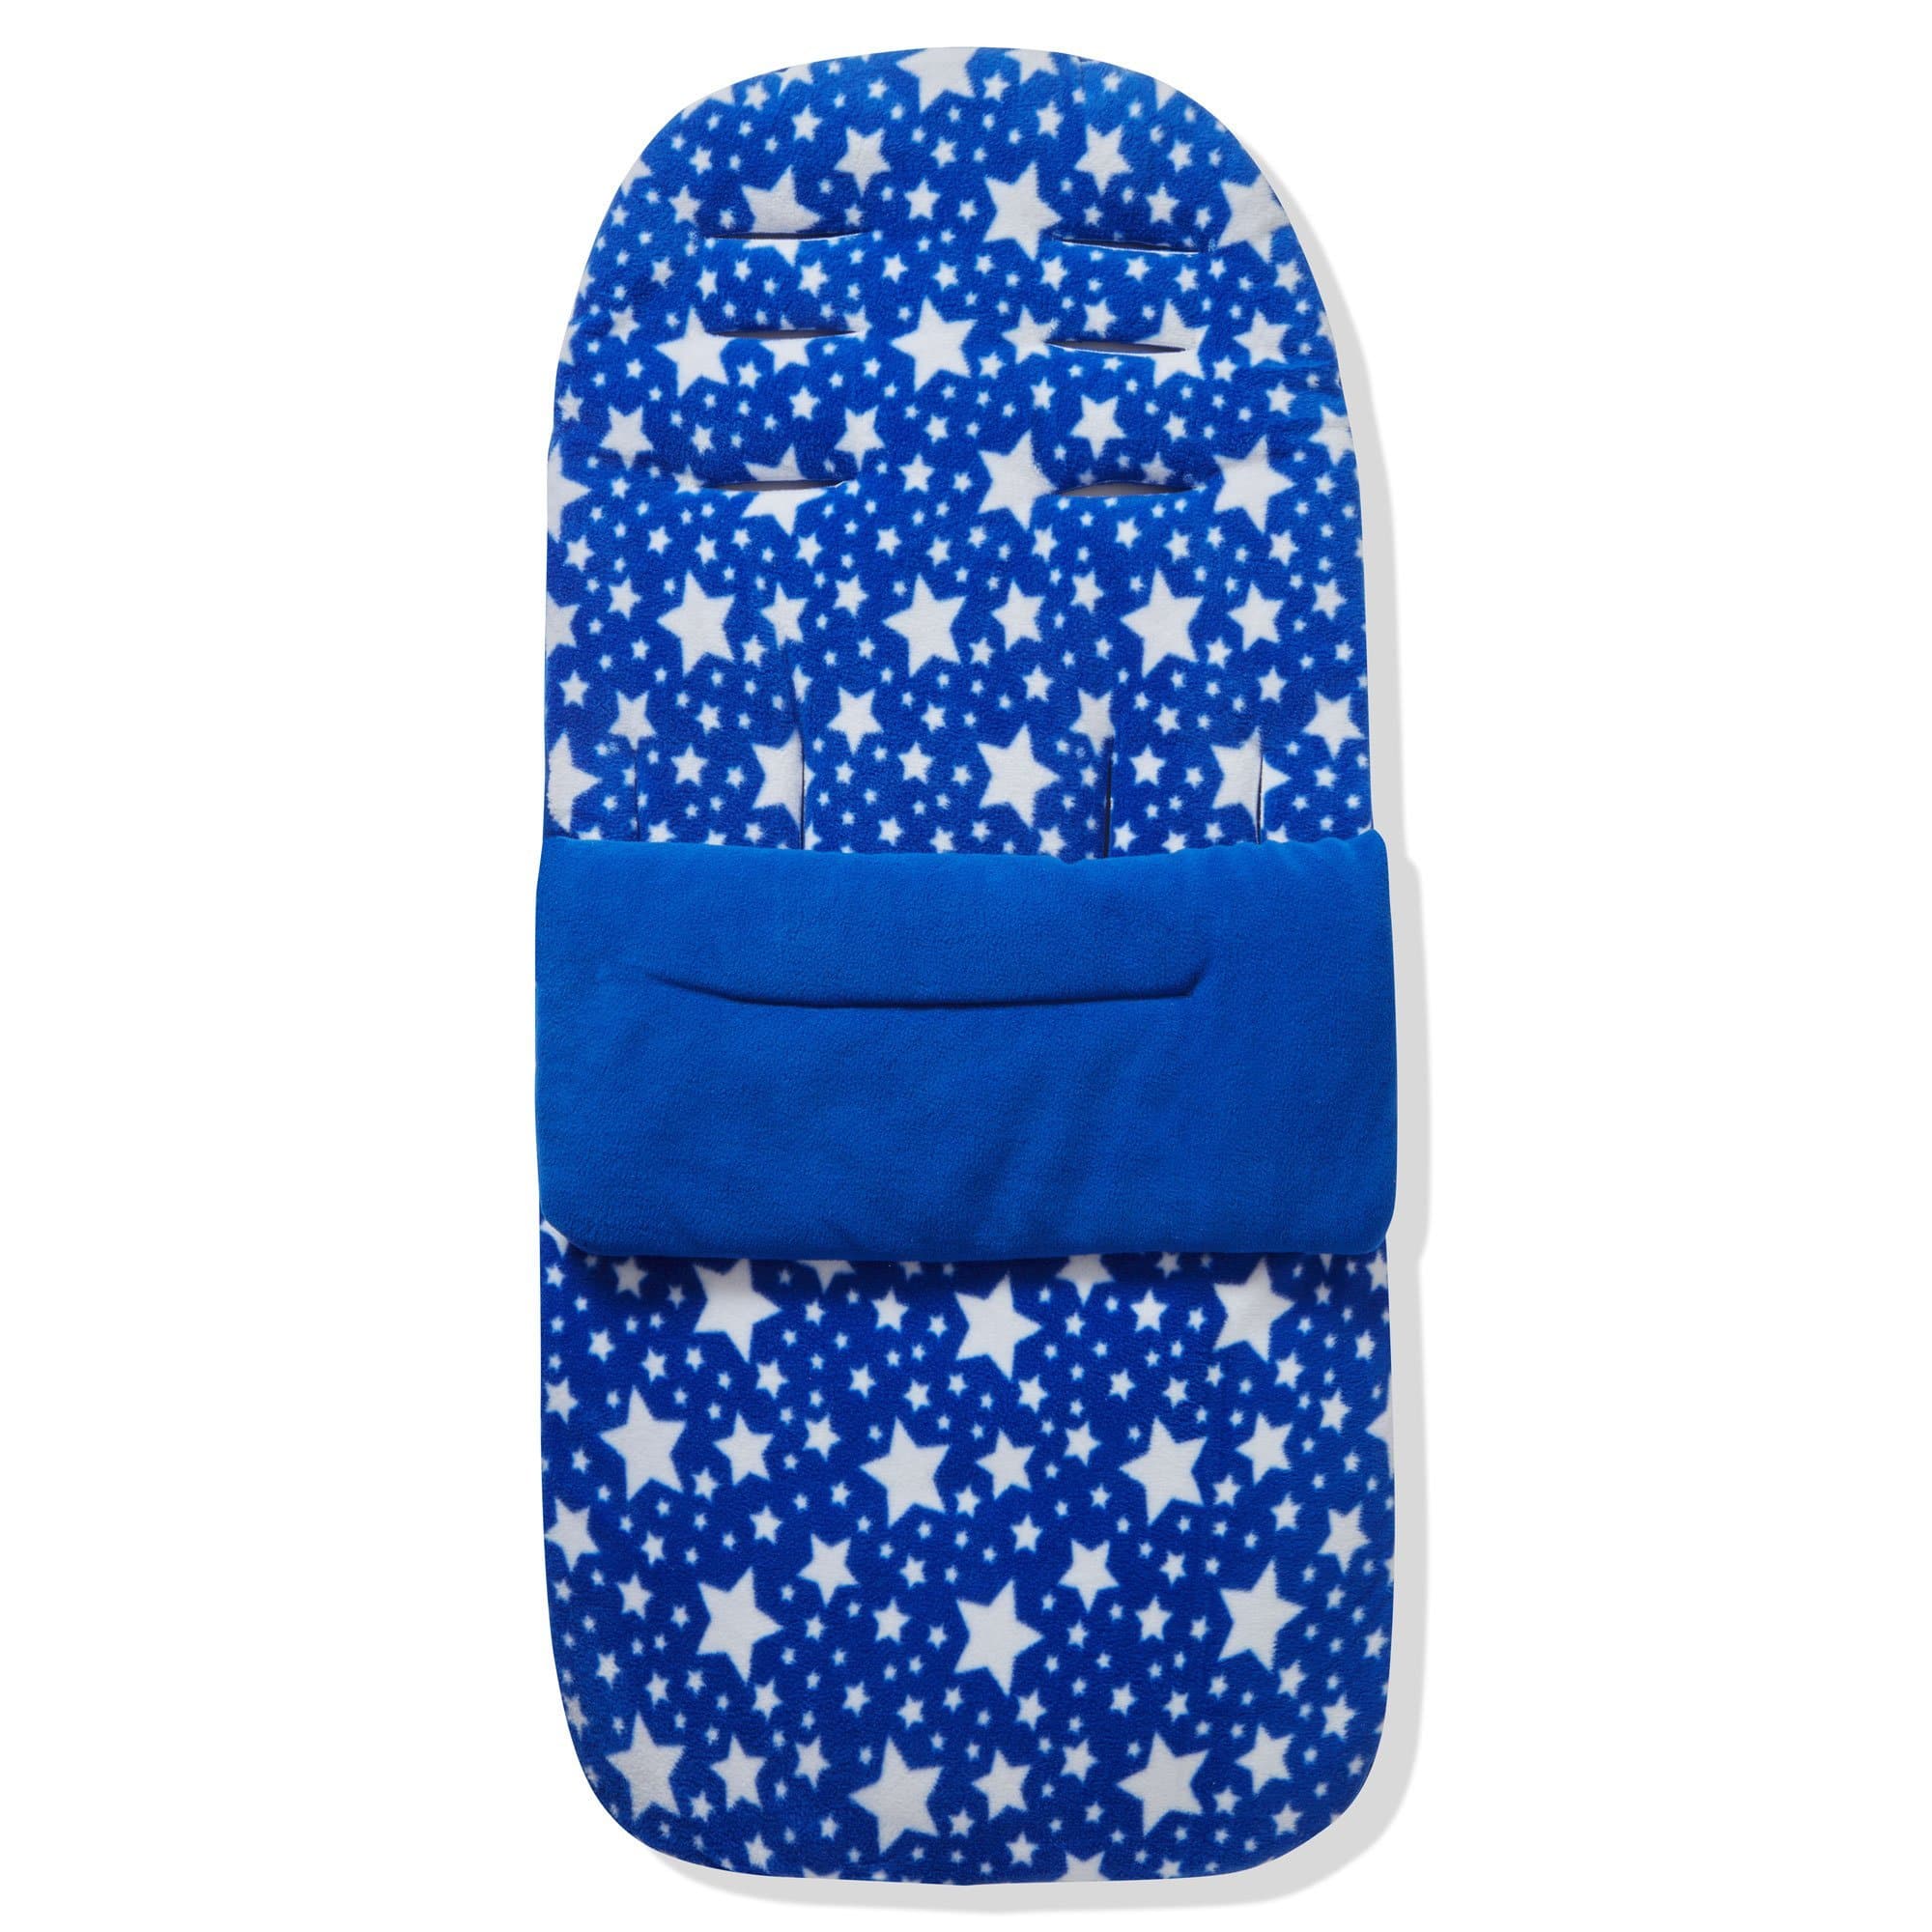 Fleece Footmuff / Cosy Toes Compatible with Inglesina - Blue Star / Fits All Models | For Your Little One